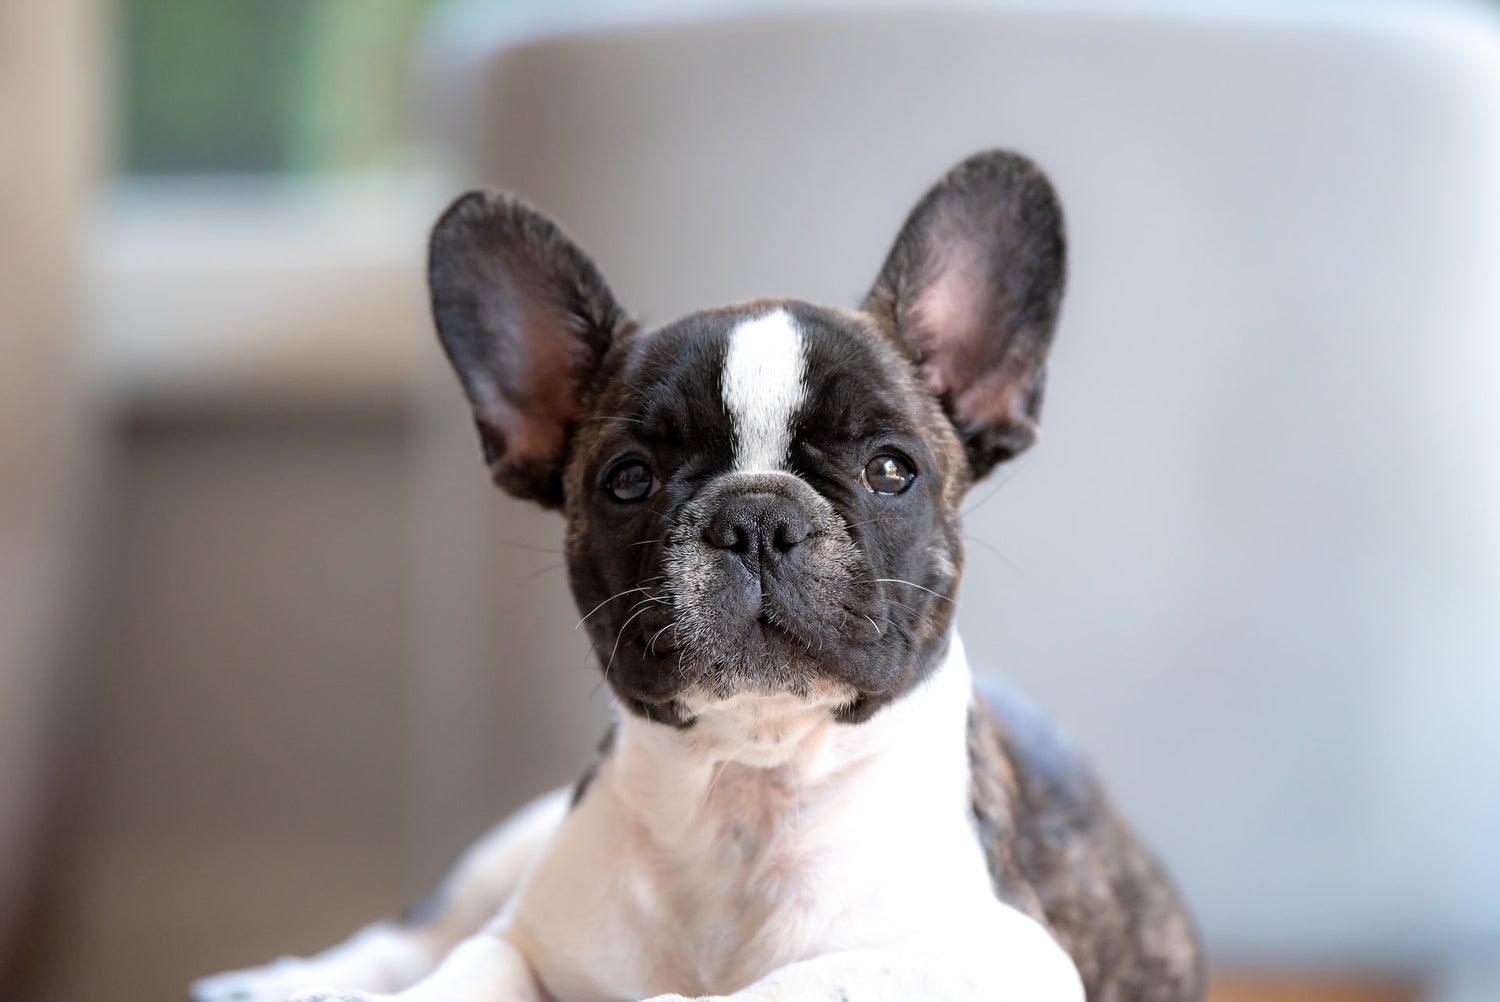 5 Top Frenchies Rescues And Adoption Centers in The US